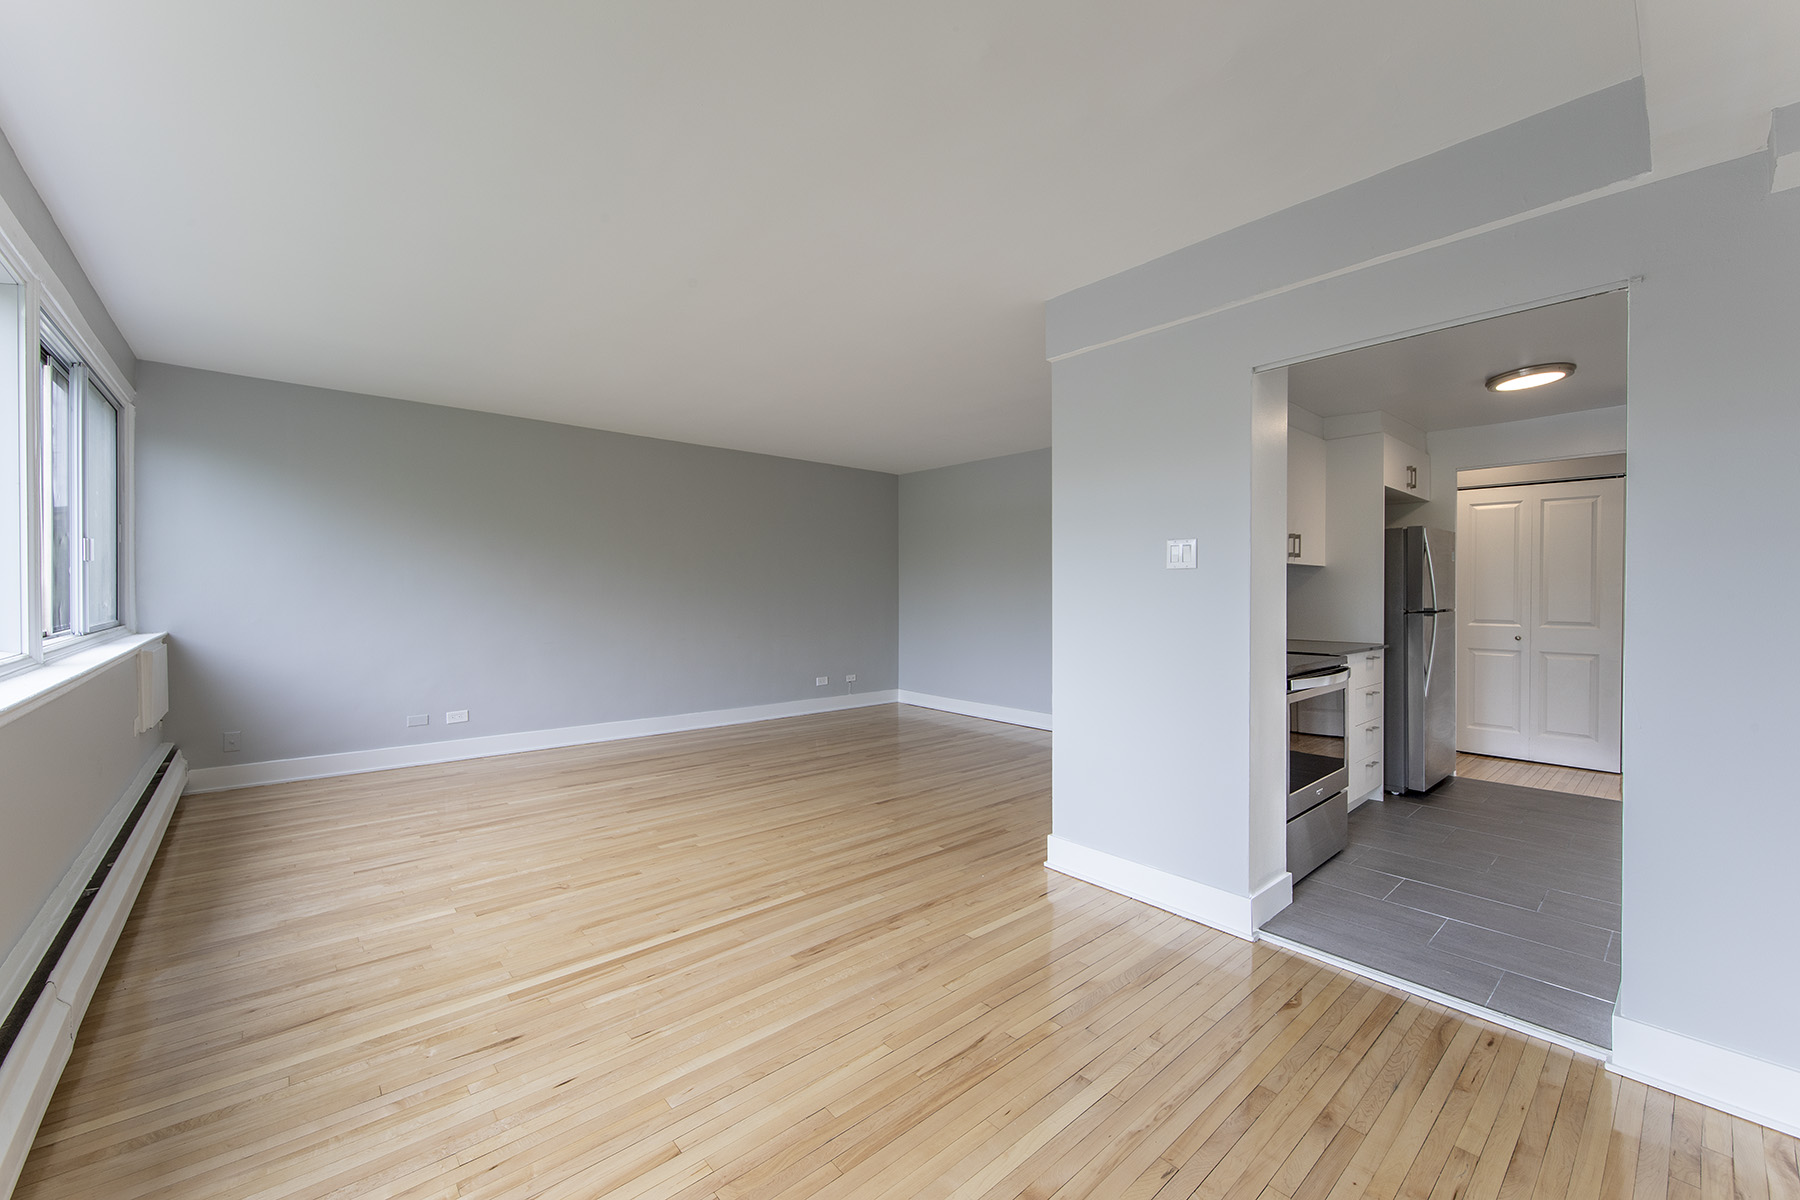 2 bedroom Apartments for rent in Cote-St-Luc at 5765 Cote St-Luc - Photo 02 - RentQuebecApartments – L401533